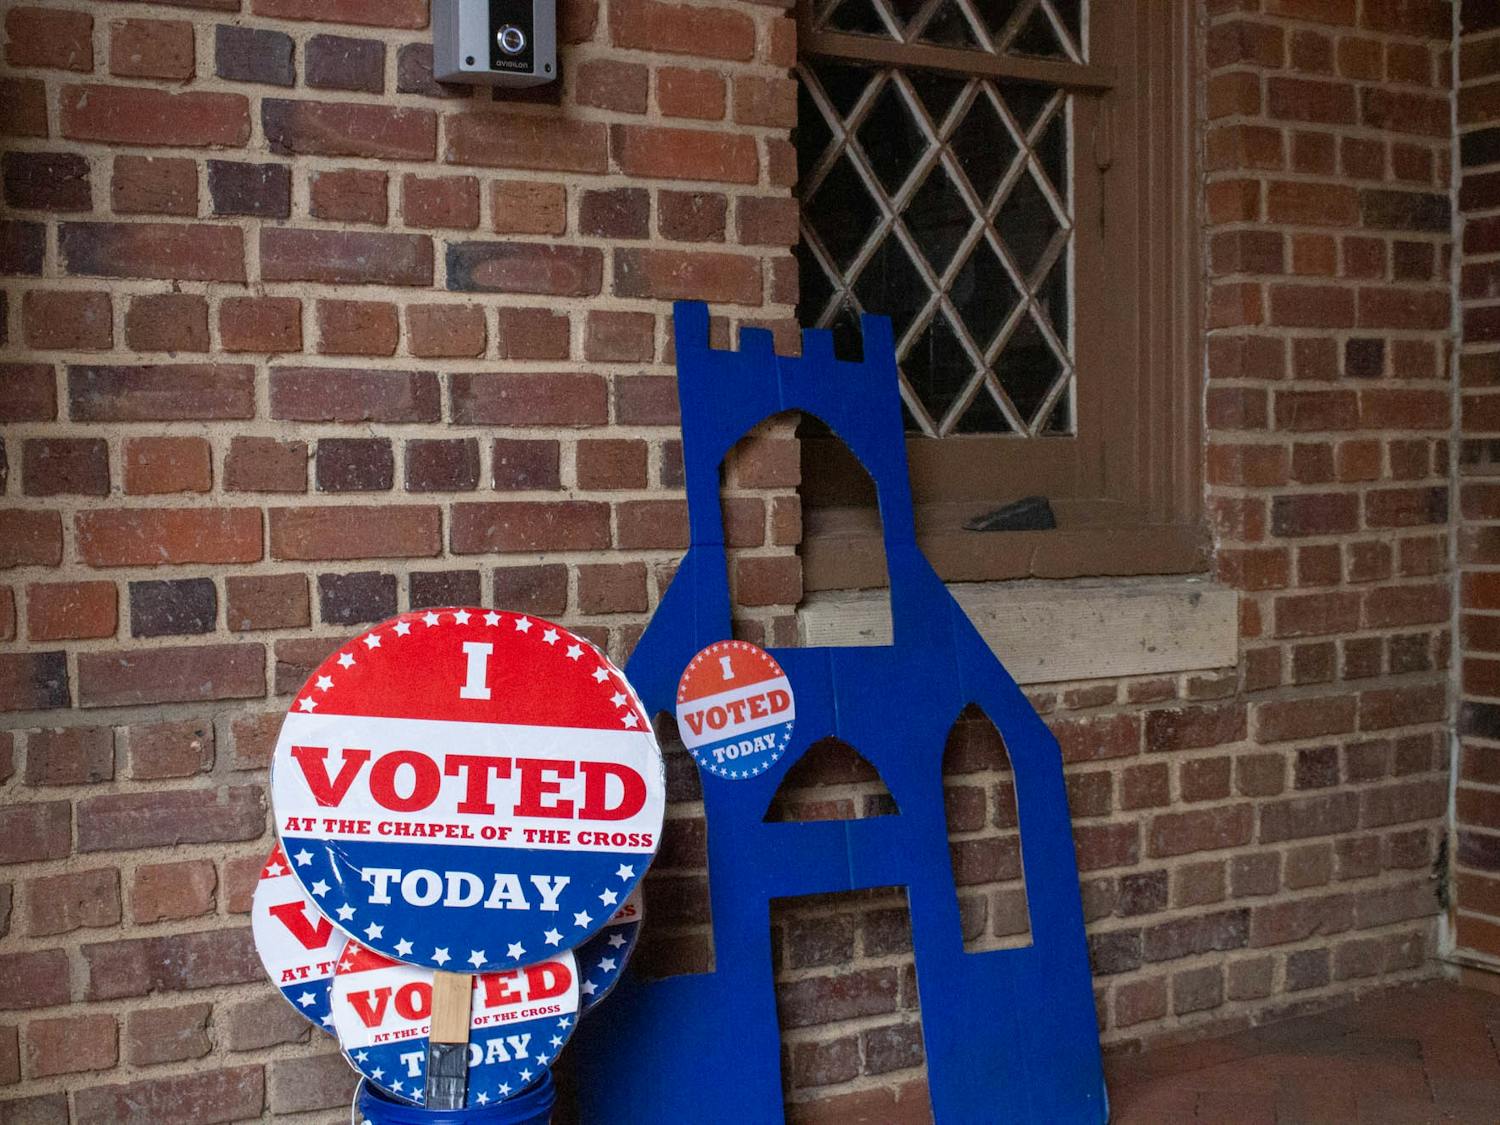 Signs sit outside Chapel of the Cross in Chapel Hill, N.C., on Sunday, Oct. 30, 2022. Early voting is open to residents until Nov. 5.